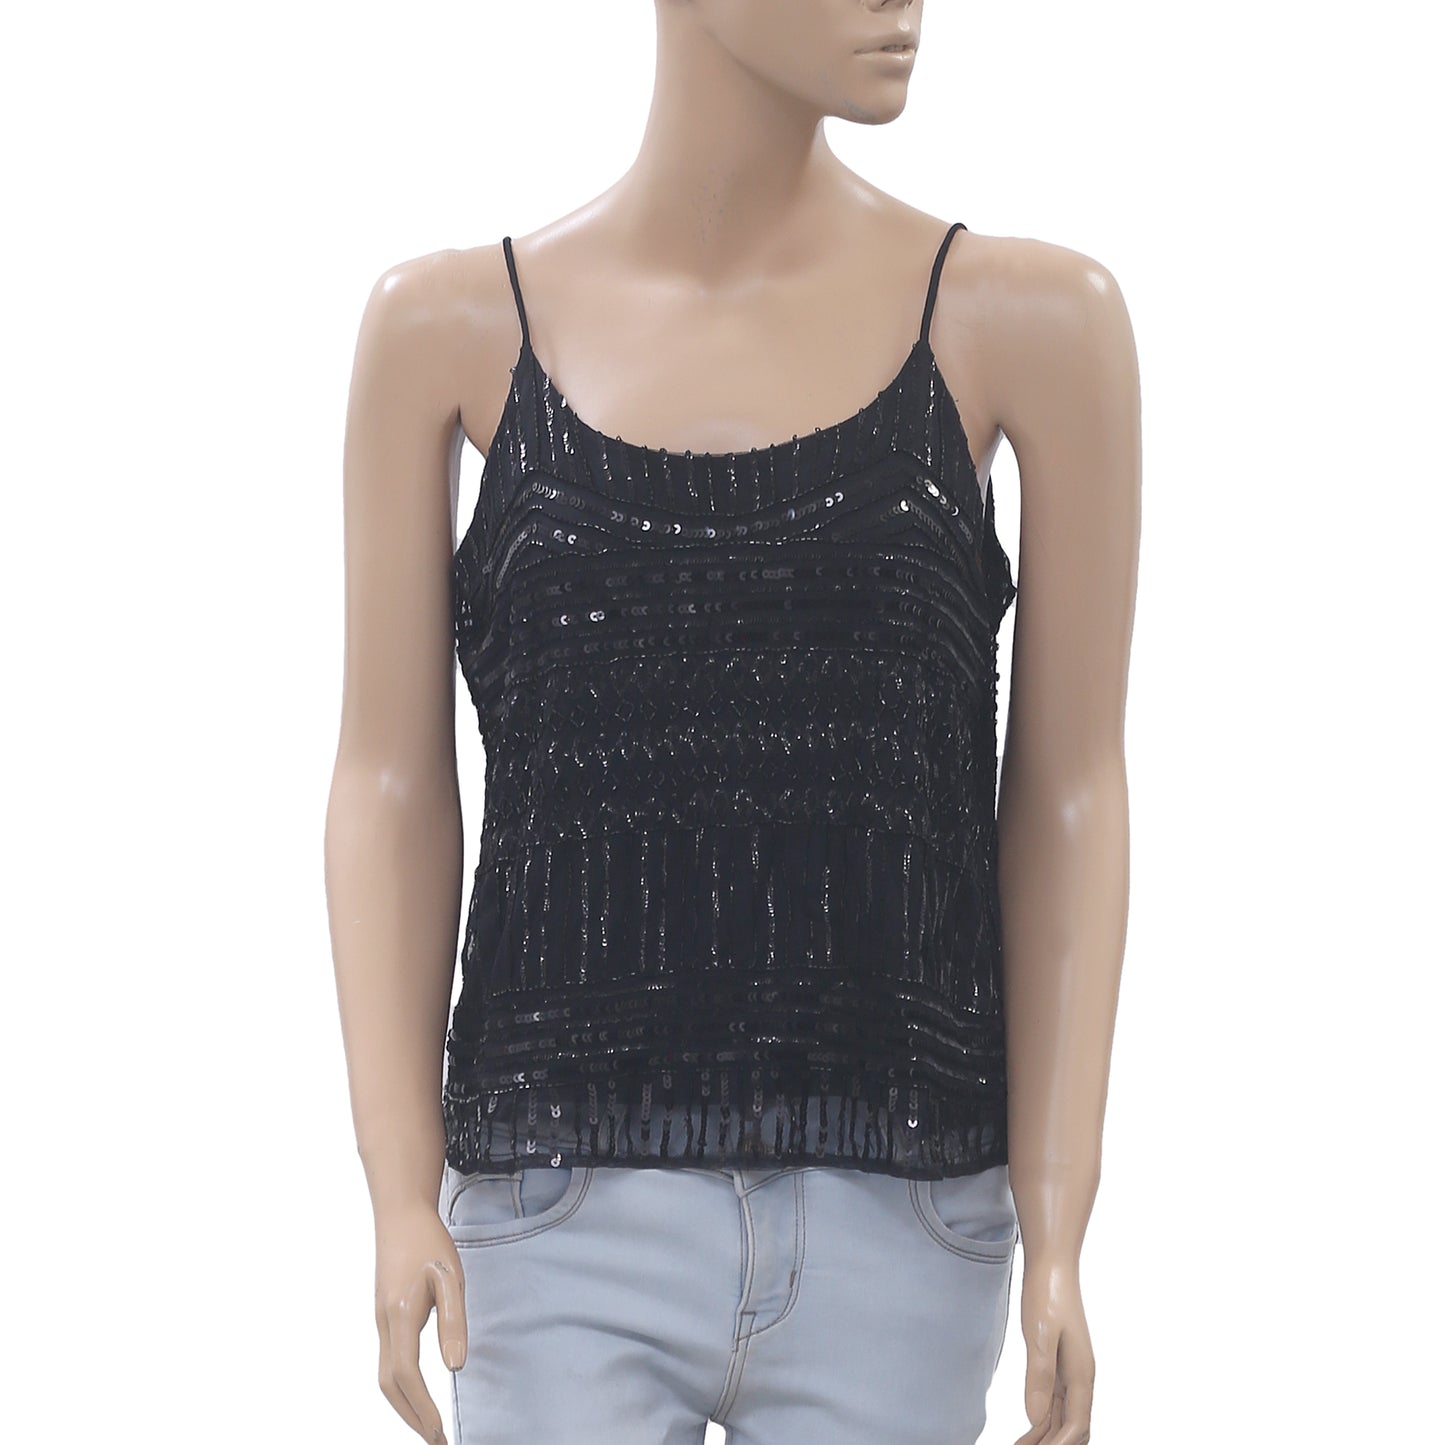 Asos Bead & Sequin Embellished Camisole Blouse Top